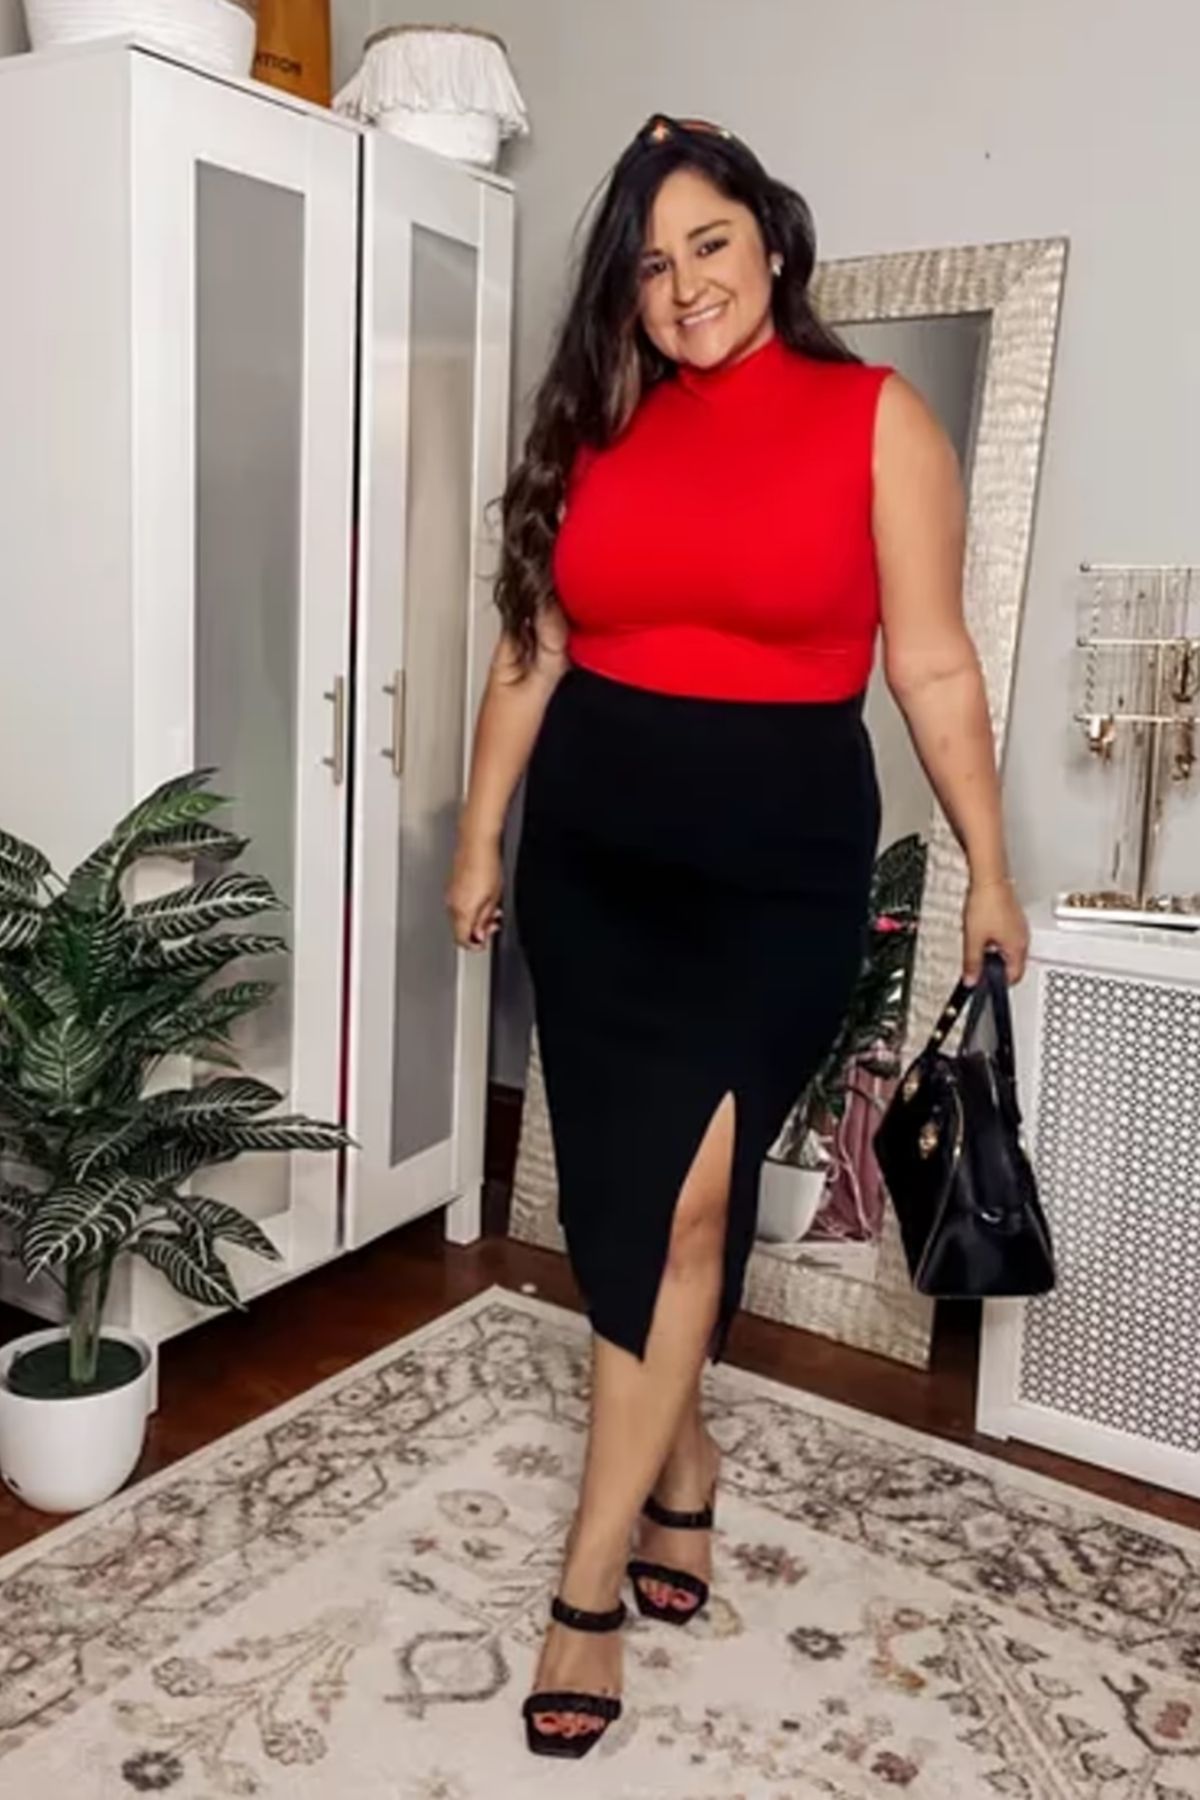 Bold red top, high-waisted black skirt with a slit, black accessories.